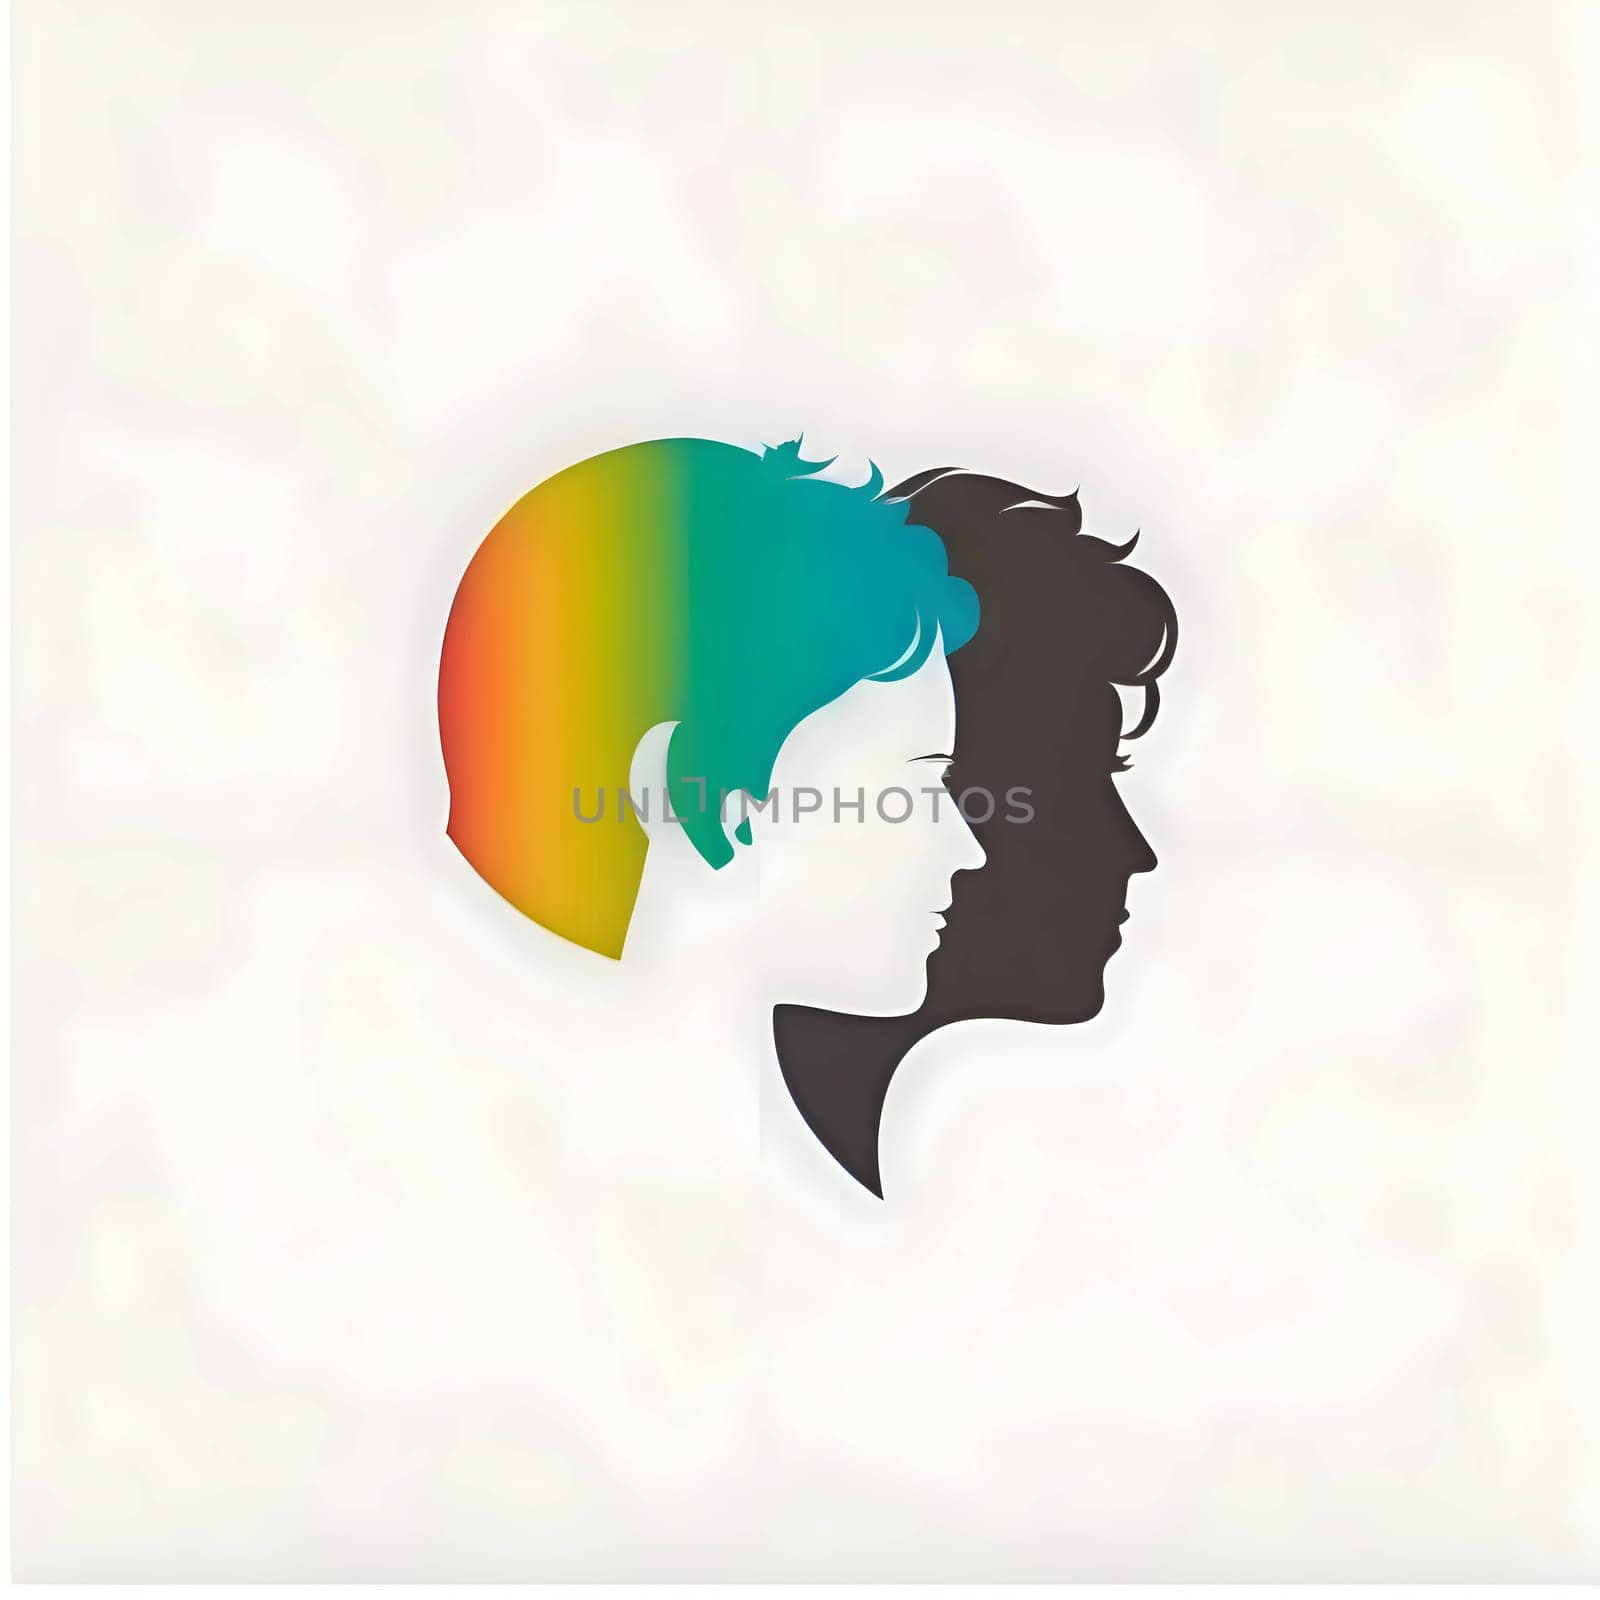 Logo concept - two colorful heads facing each other on a white background, symbolizing diversity and unity.